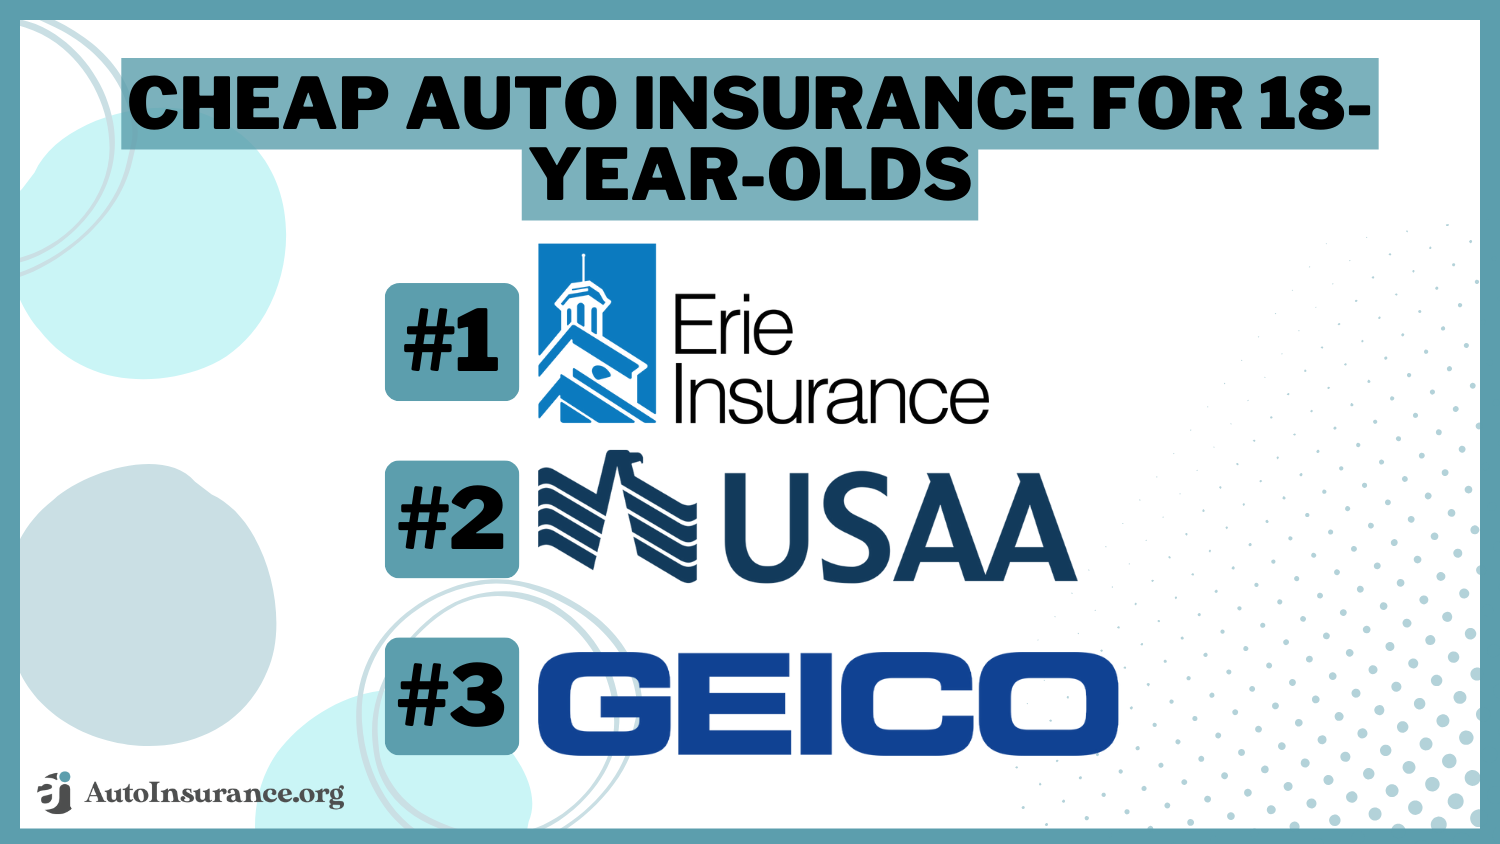 Cheap Auto Insurance for 18-Year-Old: Erie, USAA, Geico